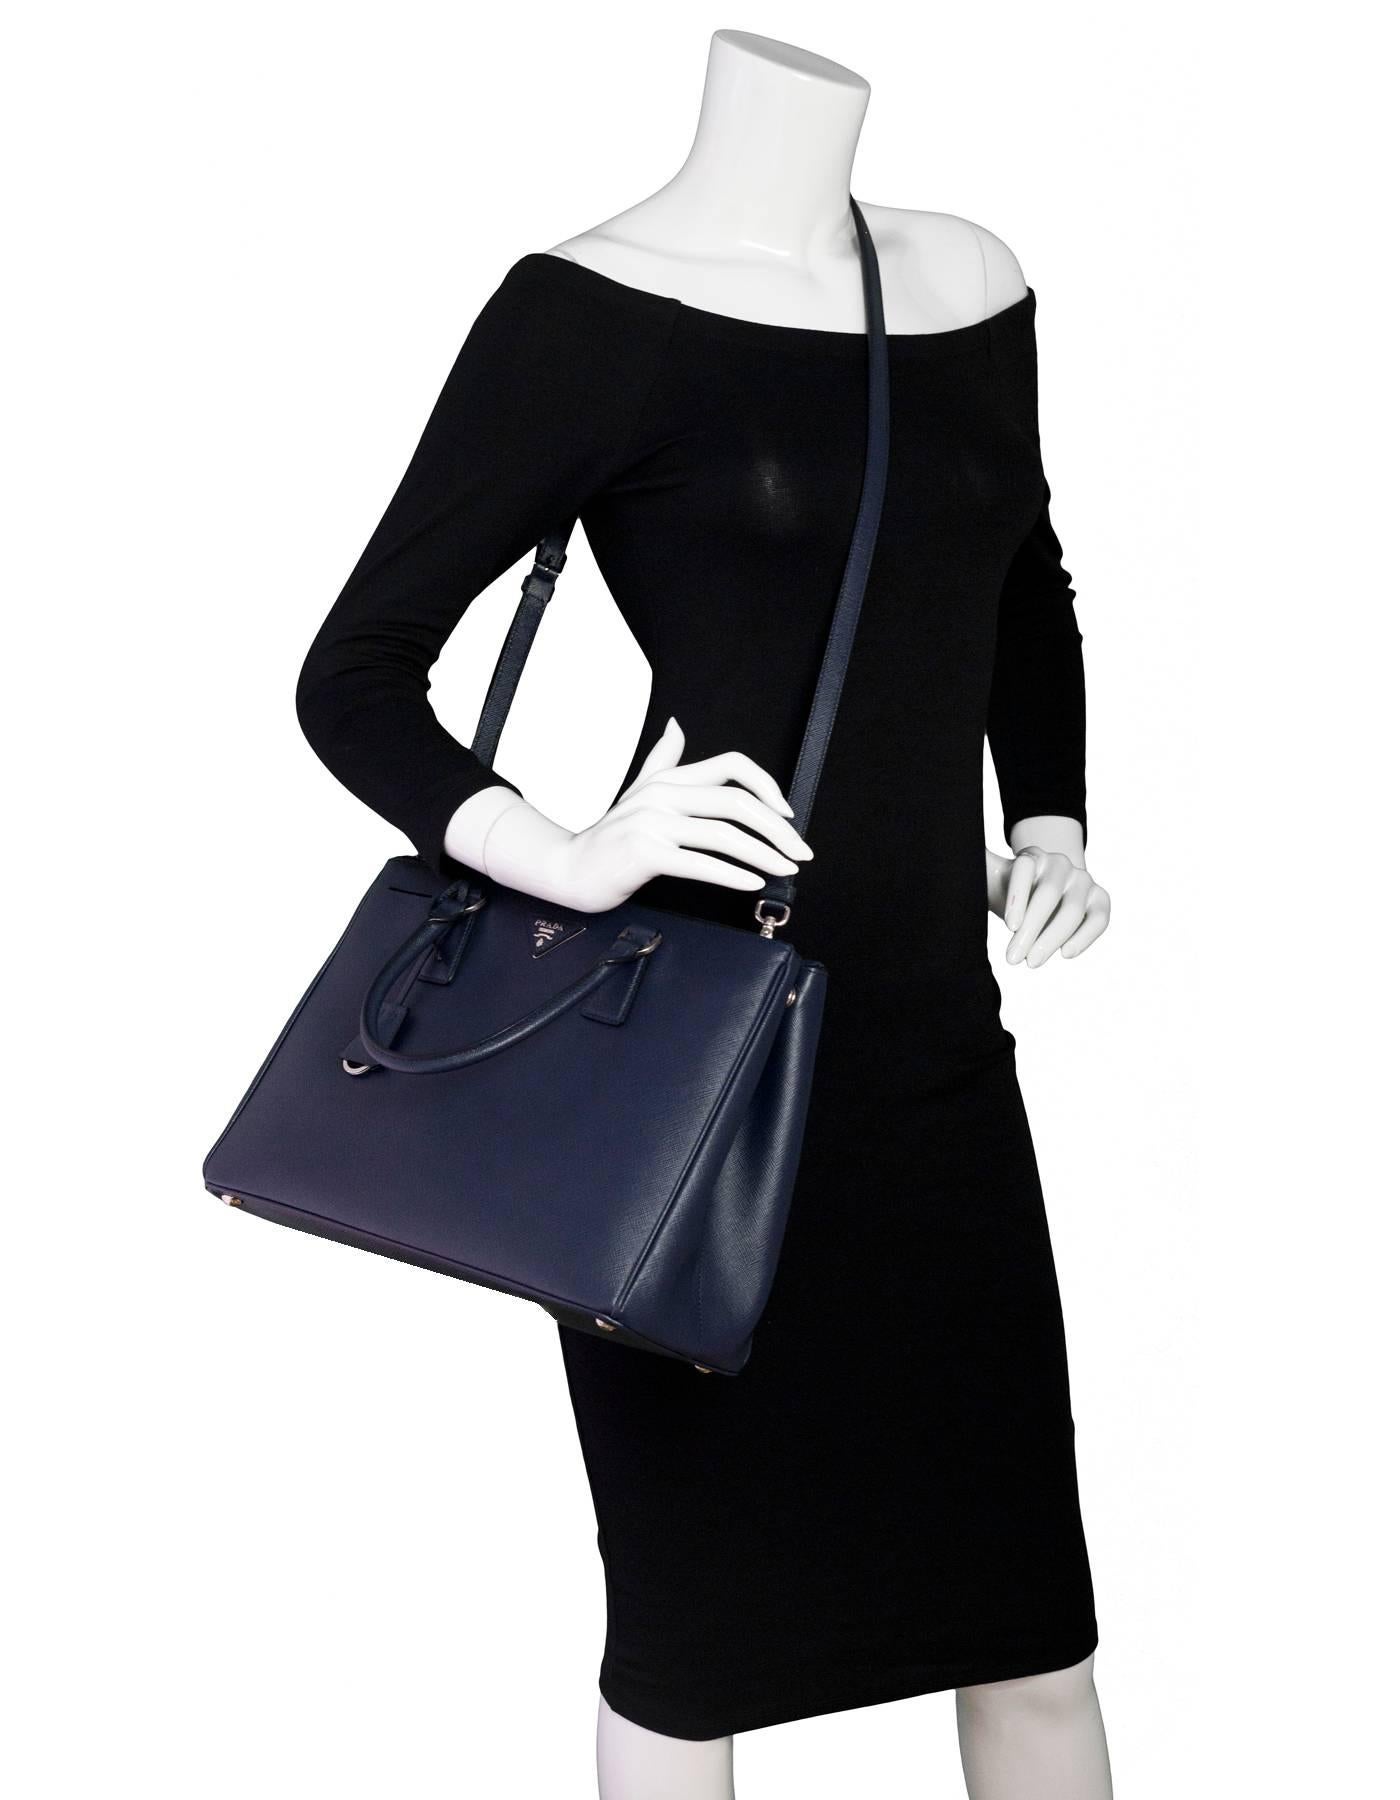 Prada Baltico Navy Medium Saffiano Leather Tote

Made In: Italy
Color: Navy
Materials: Saffiano leather, metal
Lining: Navy textile
Closure/Opening: Open top
Exterior Pockets: Zip compatments at front and back
Interior Pockets: One zip wall pocket,